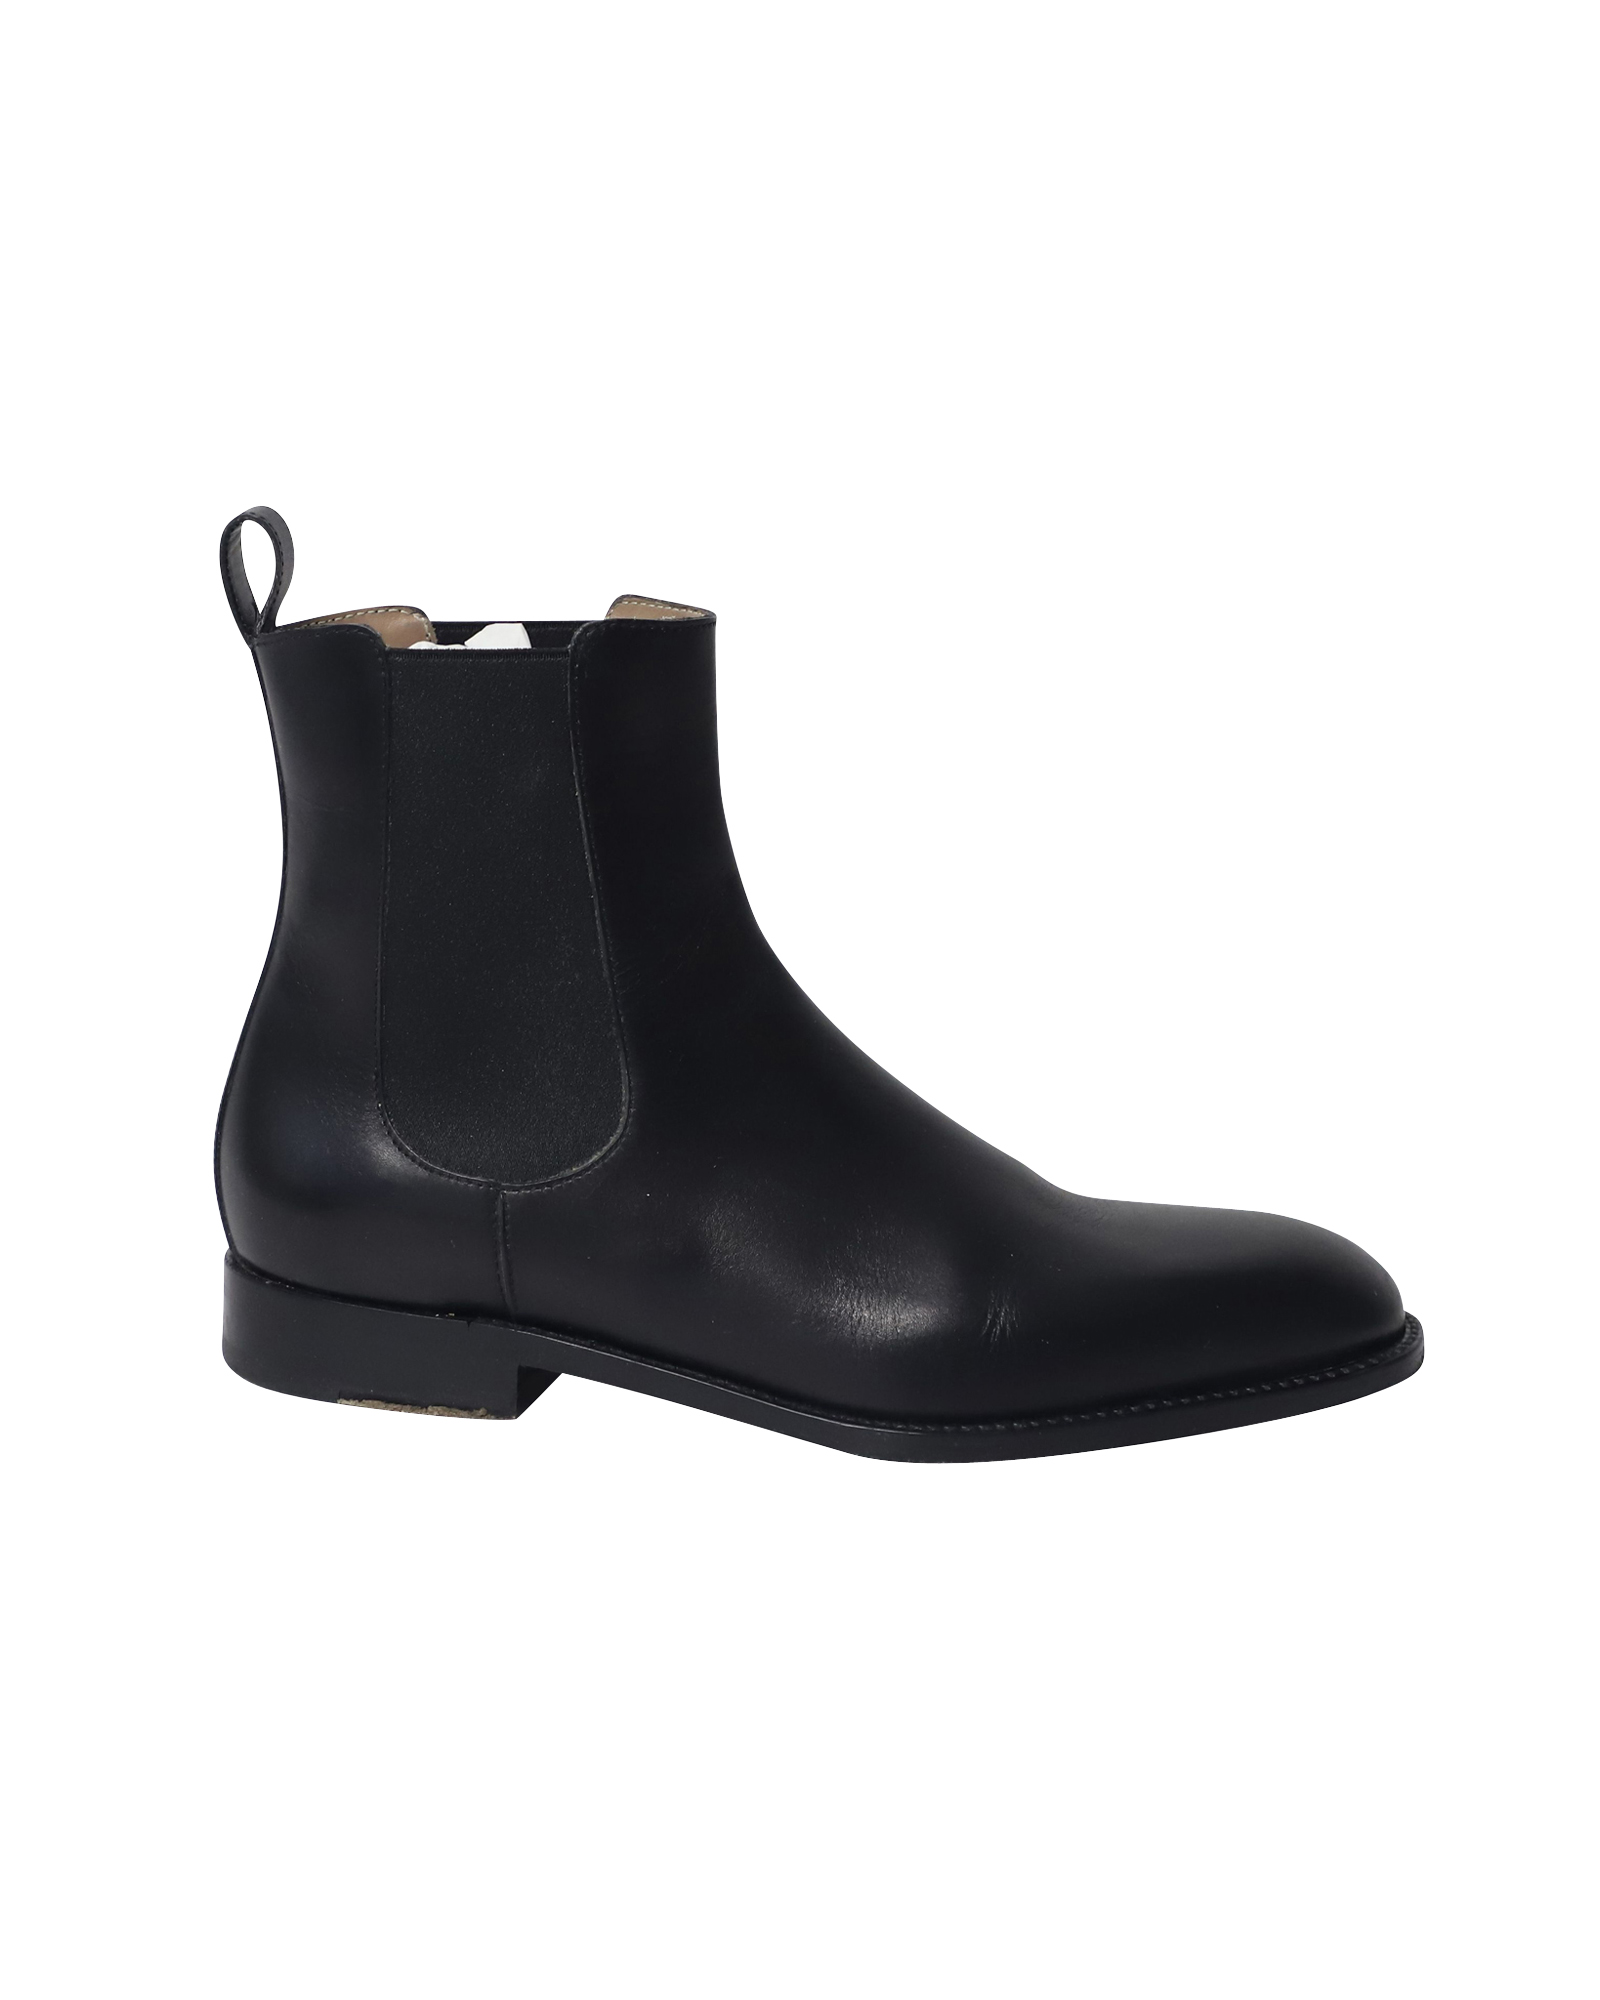 Black Leather Chelsea Boots with Elasticated Gore Detail